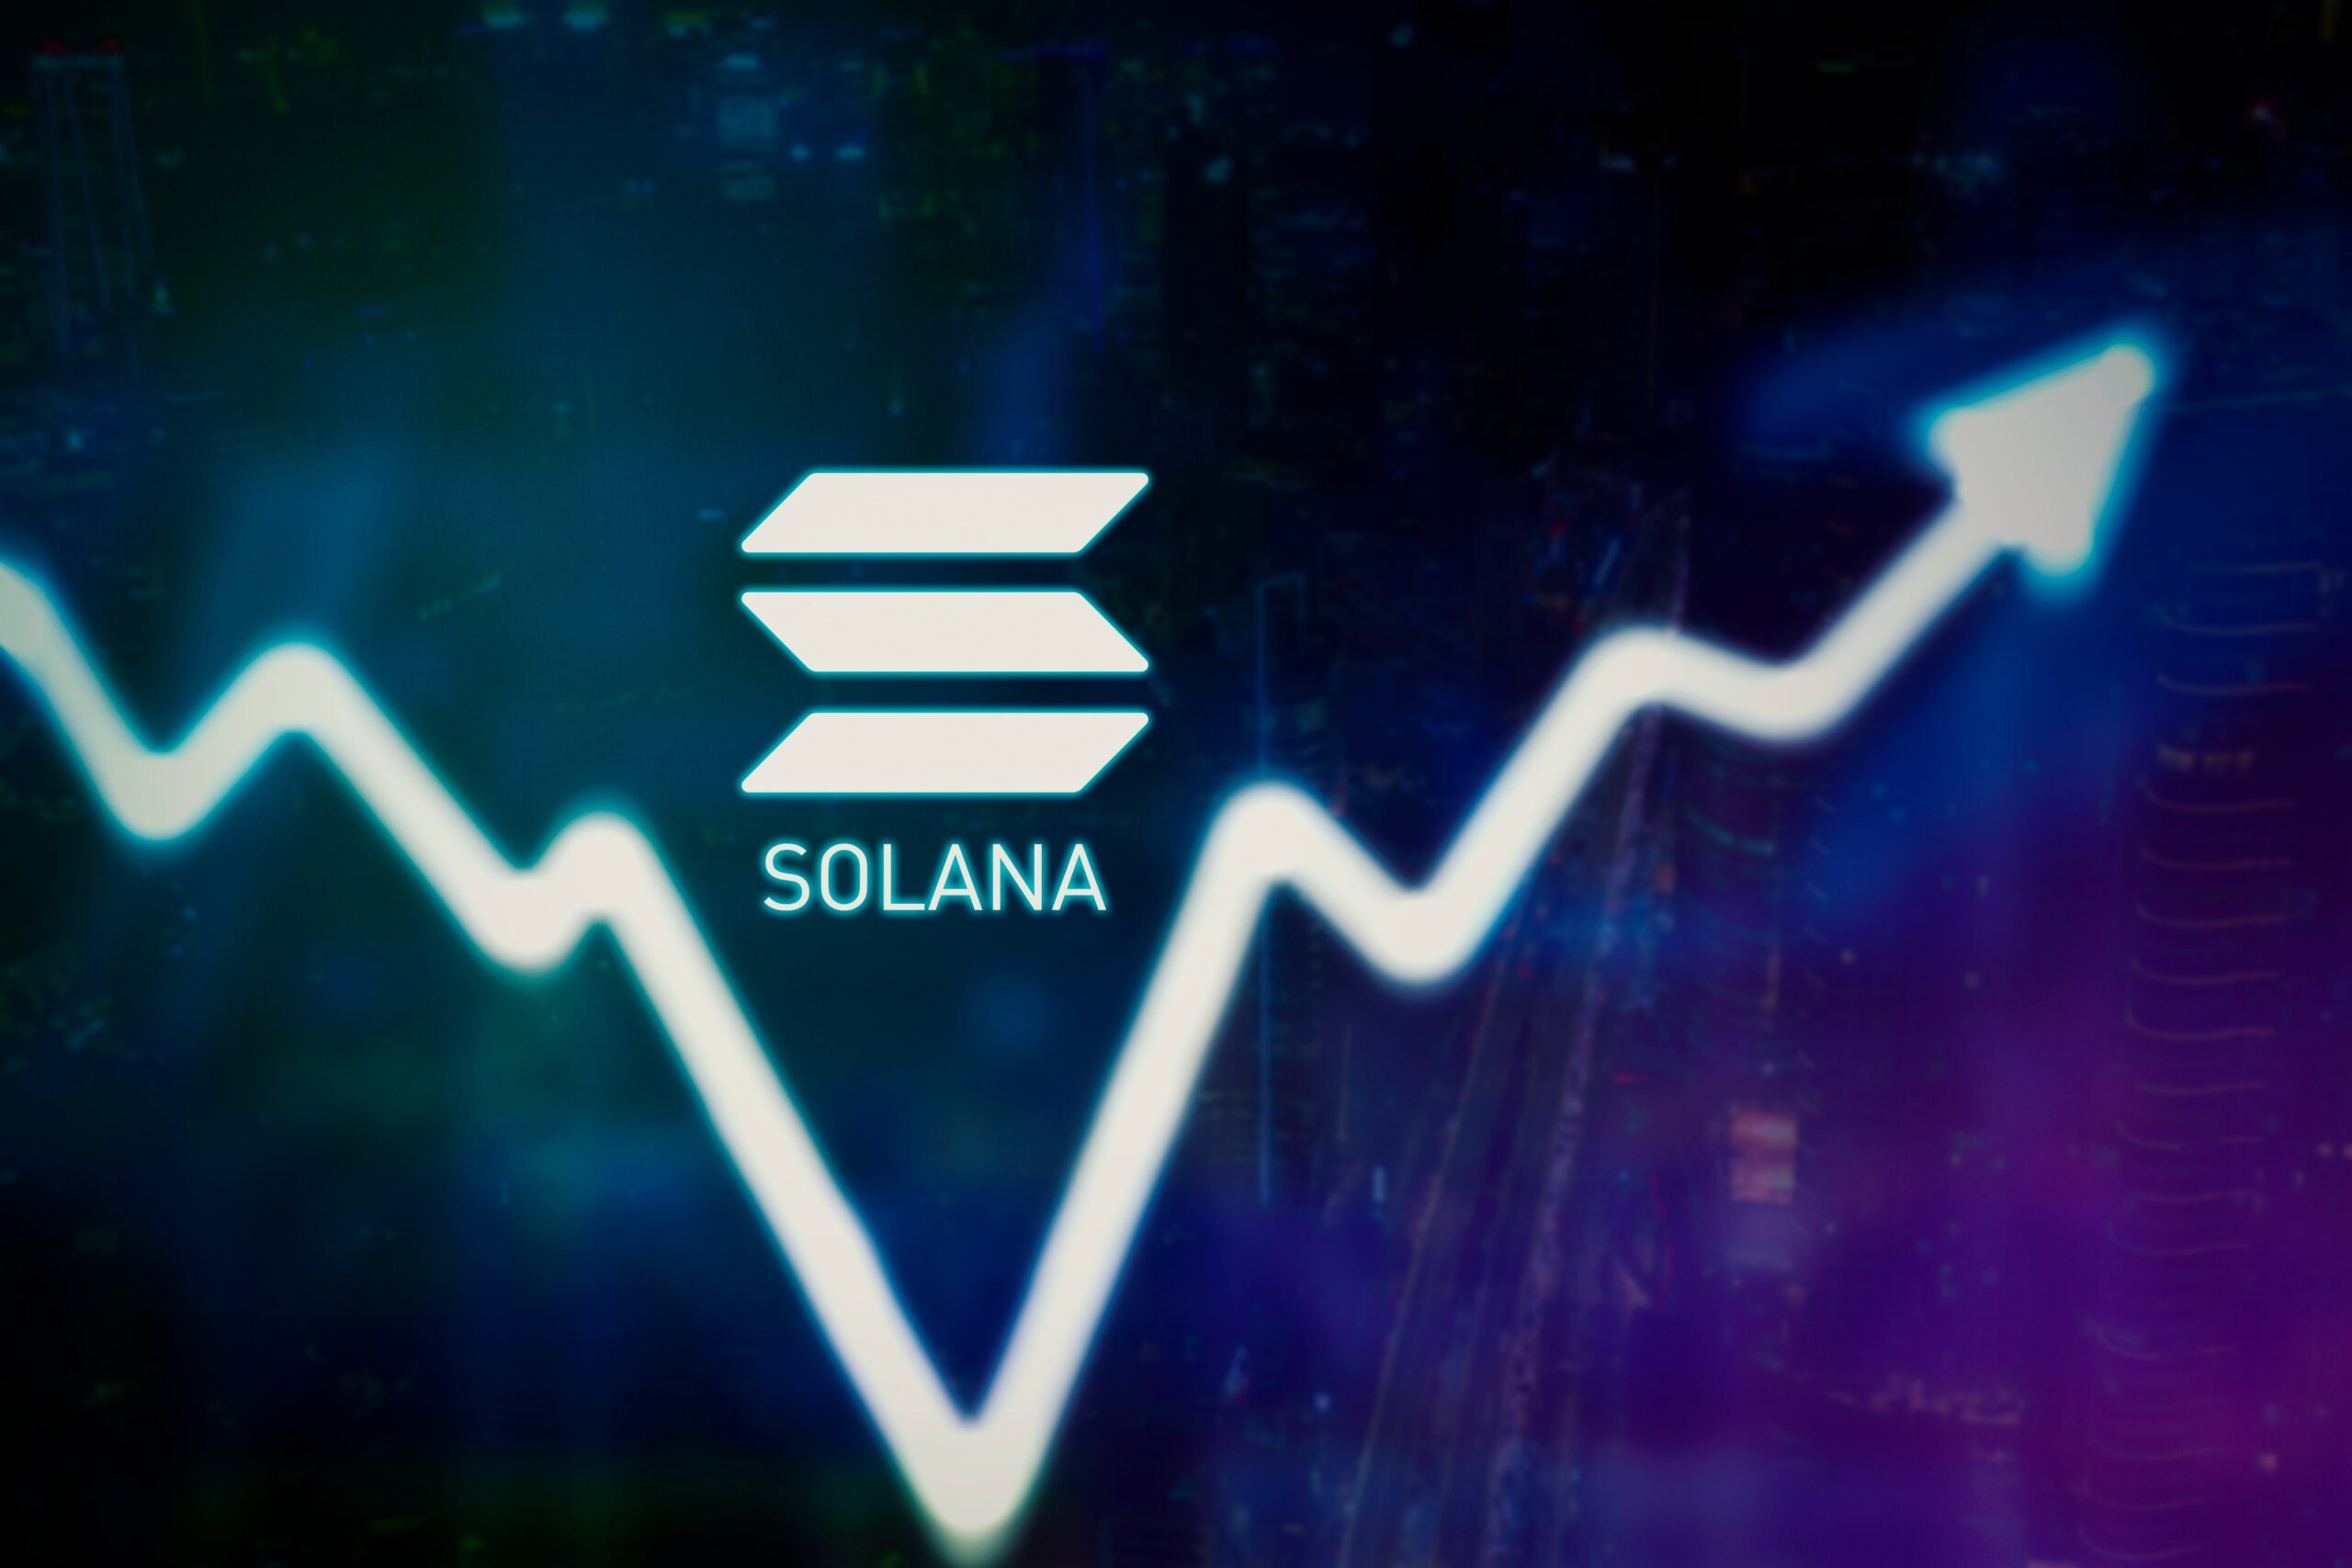 Solana Gets Listed on Bloomberg’s Terminal Amid Increased Network Adoption and Activity